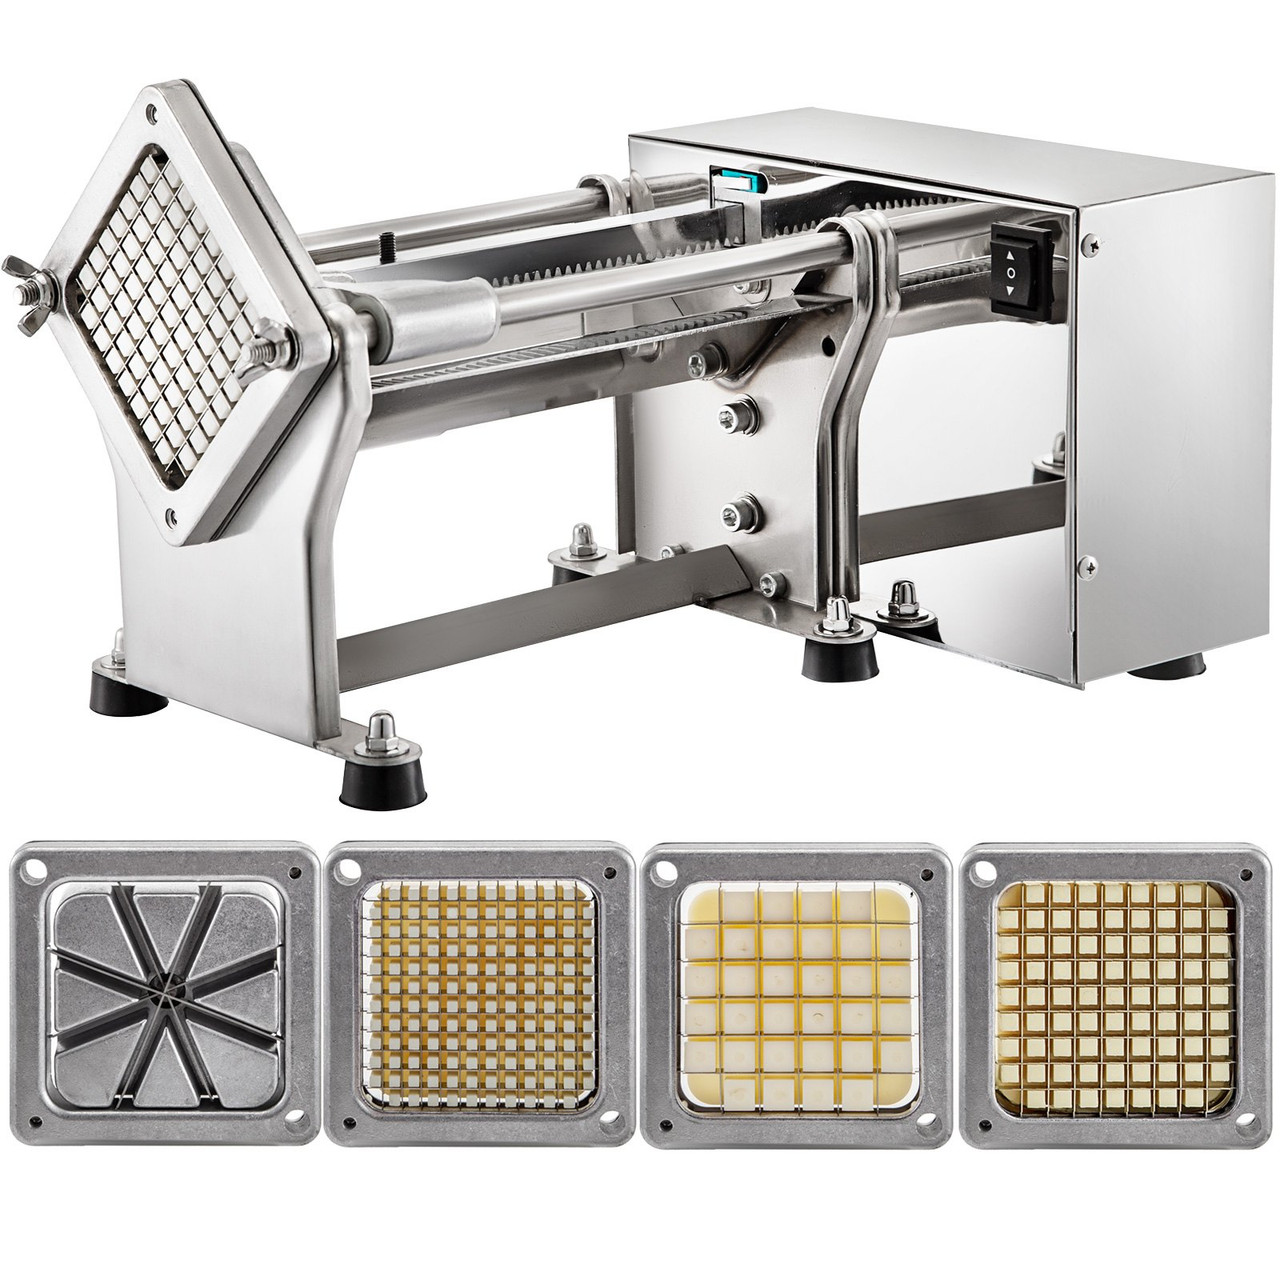 Aluminum Alloy Potato Chip Cutter Machine With 3 Blades For French